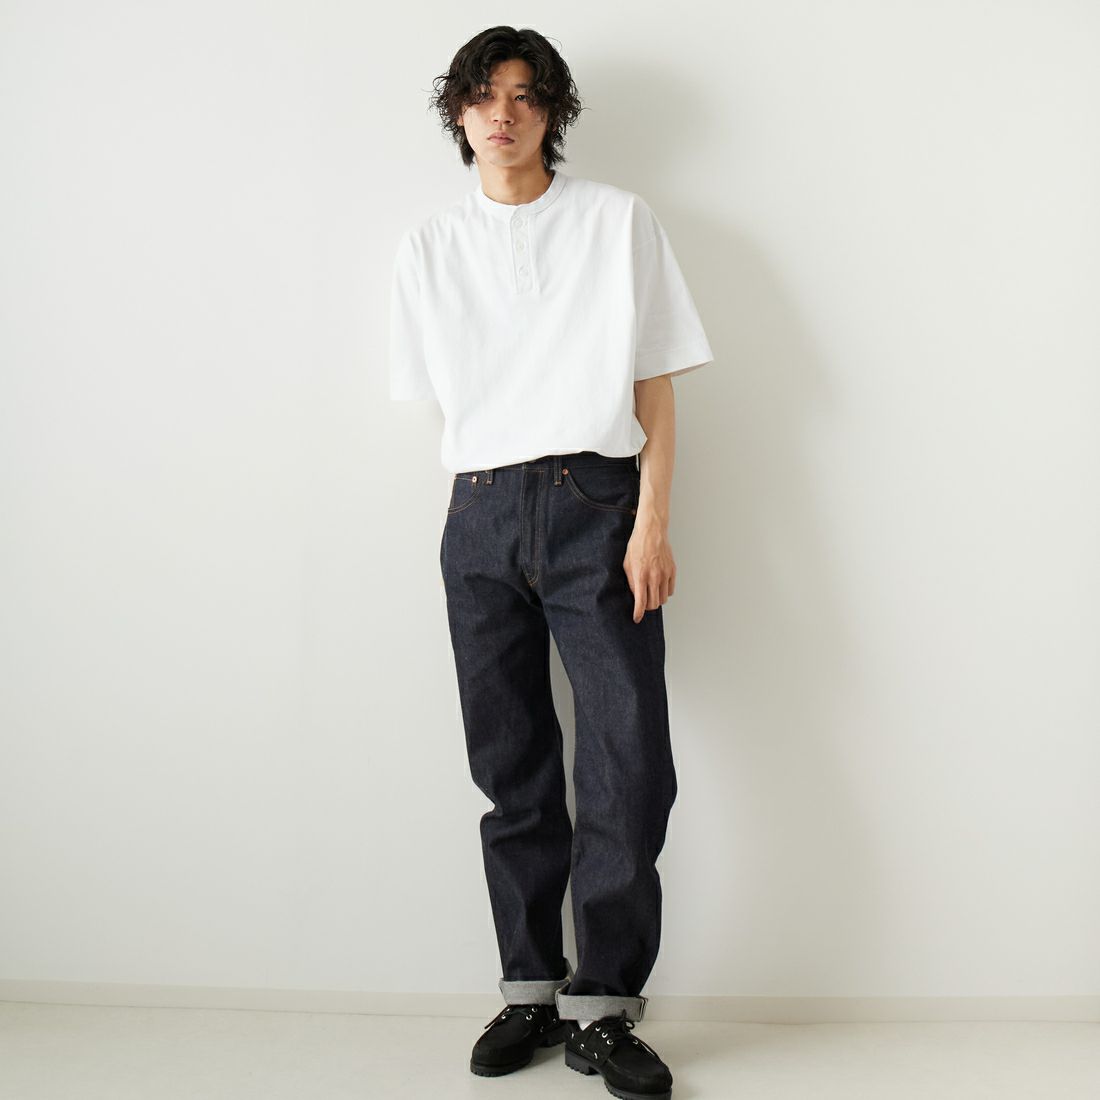 LEVIS Vintage Clothing [リーバイス ヴィンテージ クロージング] 1955モデル 501 [50155-00]